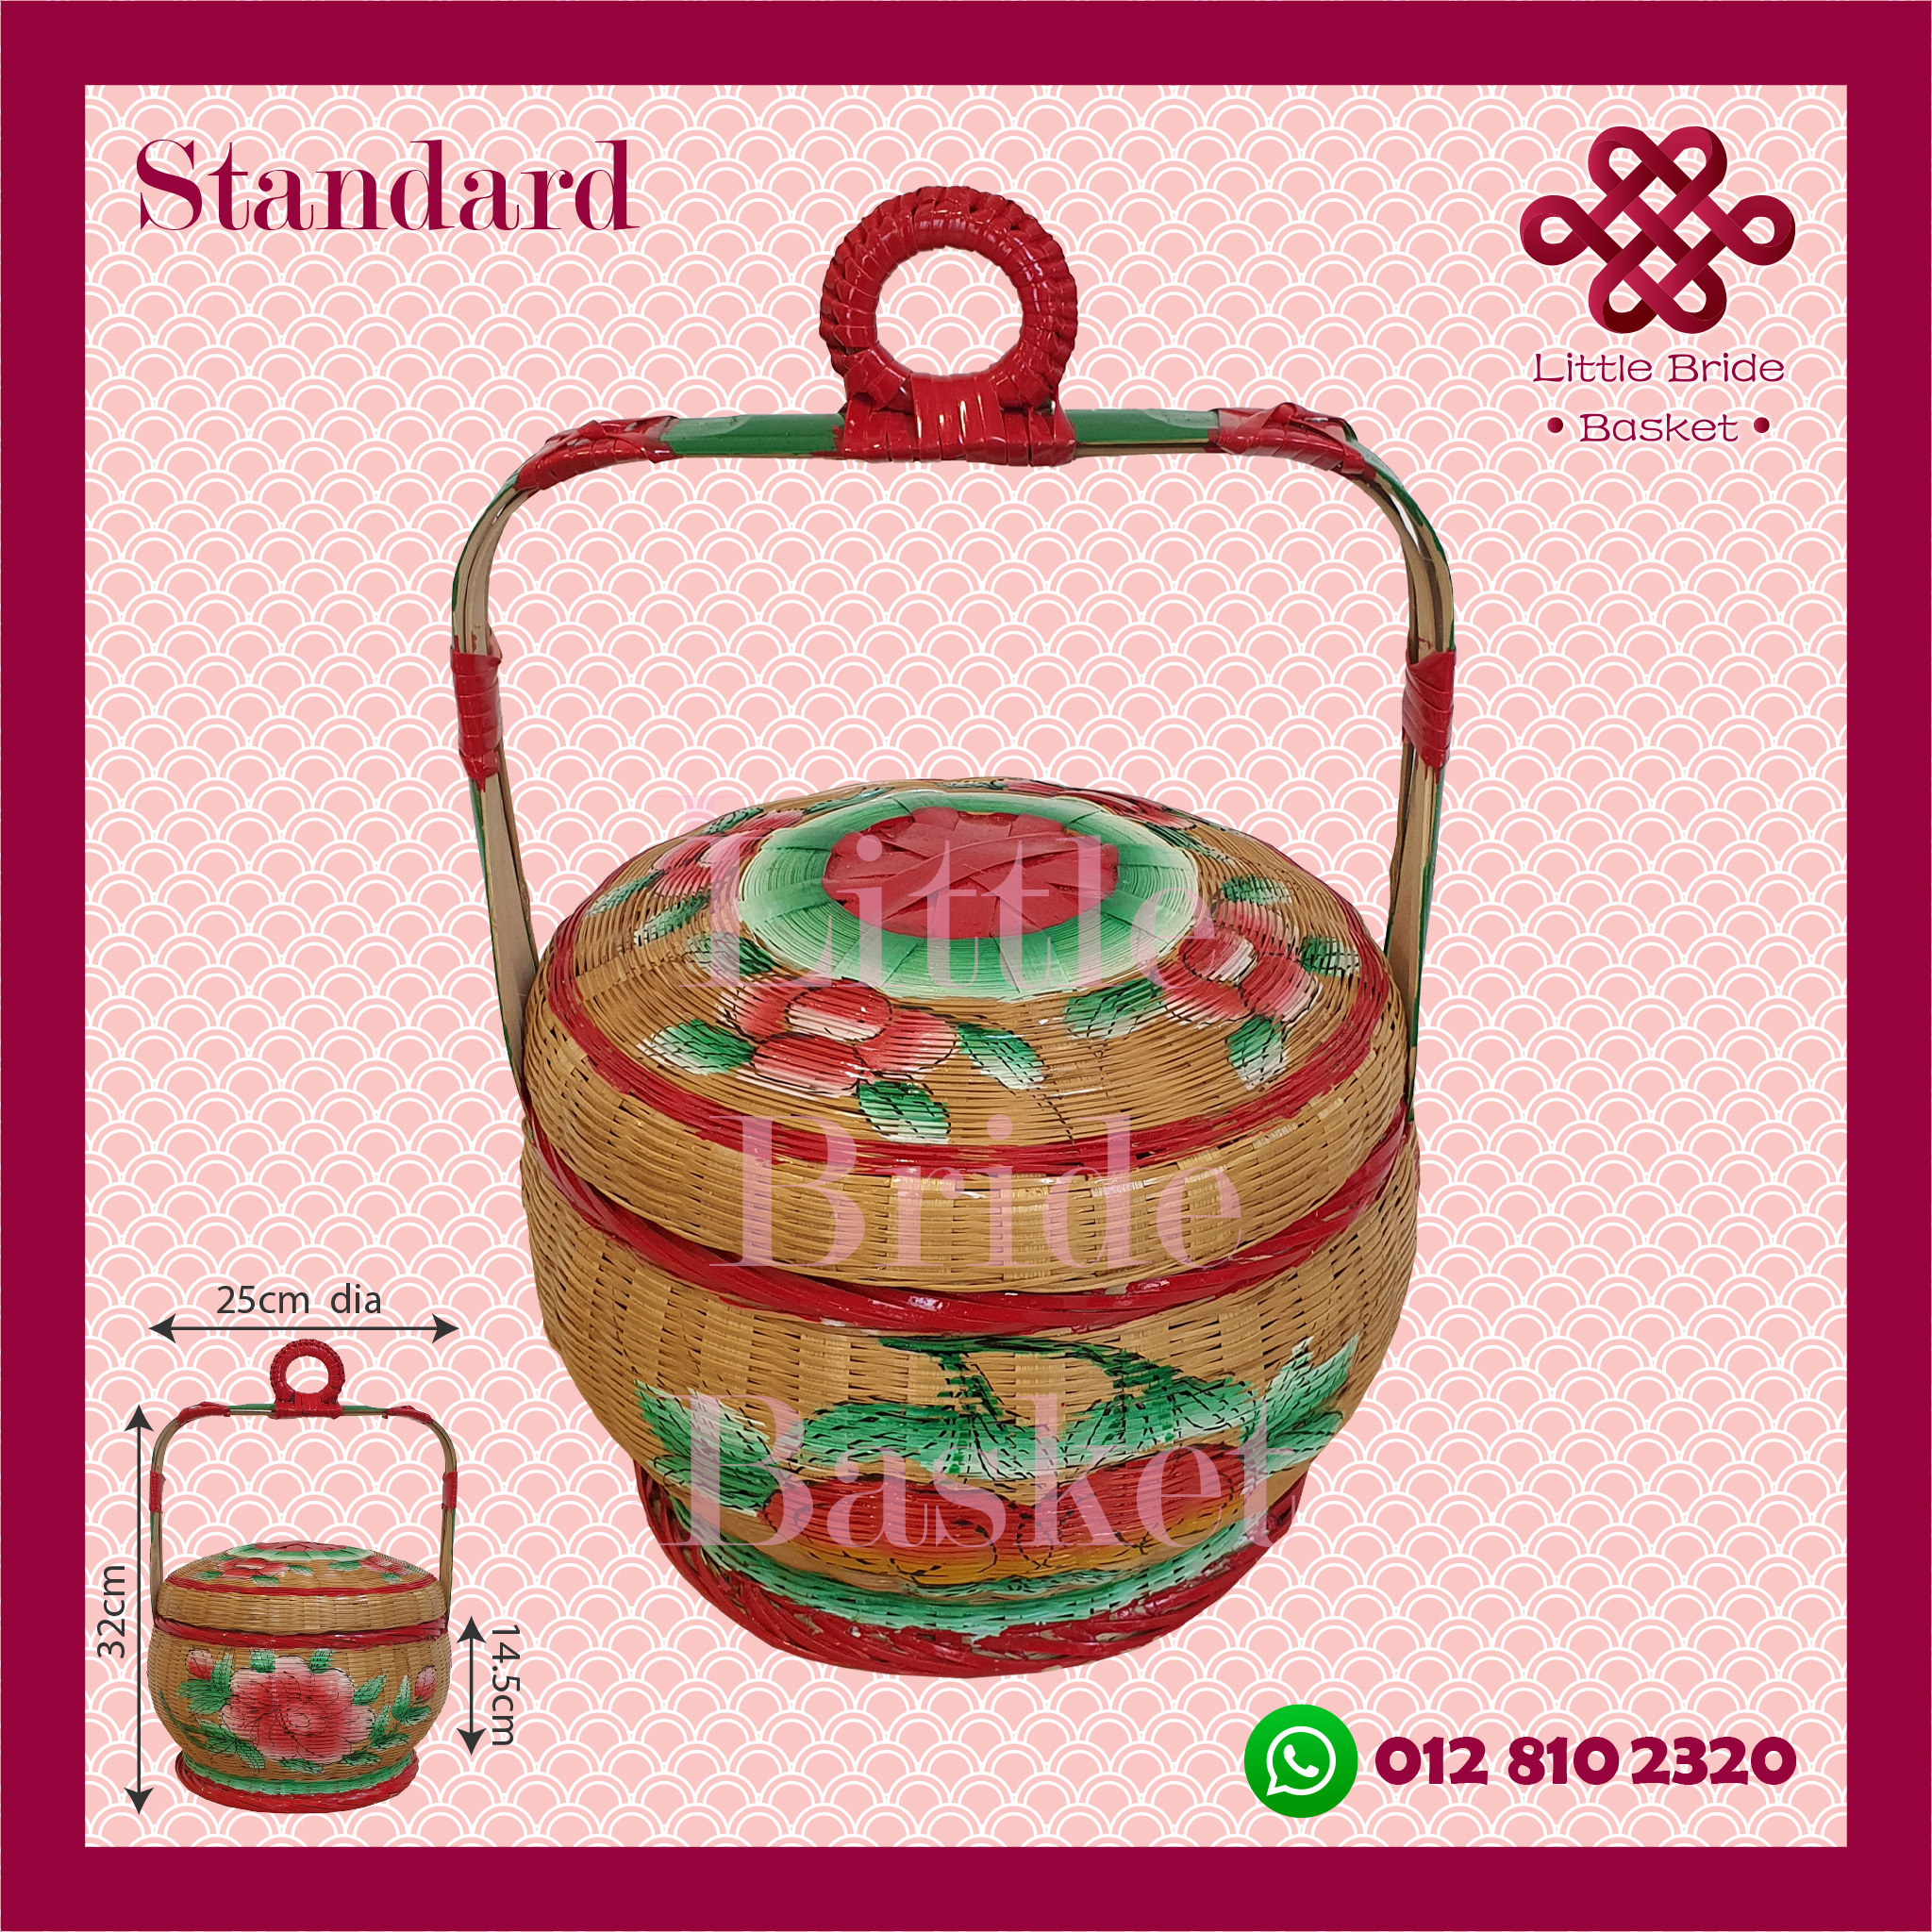 Standard Traditional Handcrafted Wedding Basket for Rent | RentSmart Asia | Renting Is The New Buying